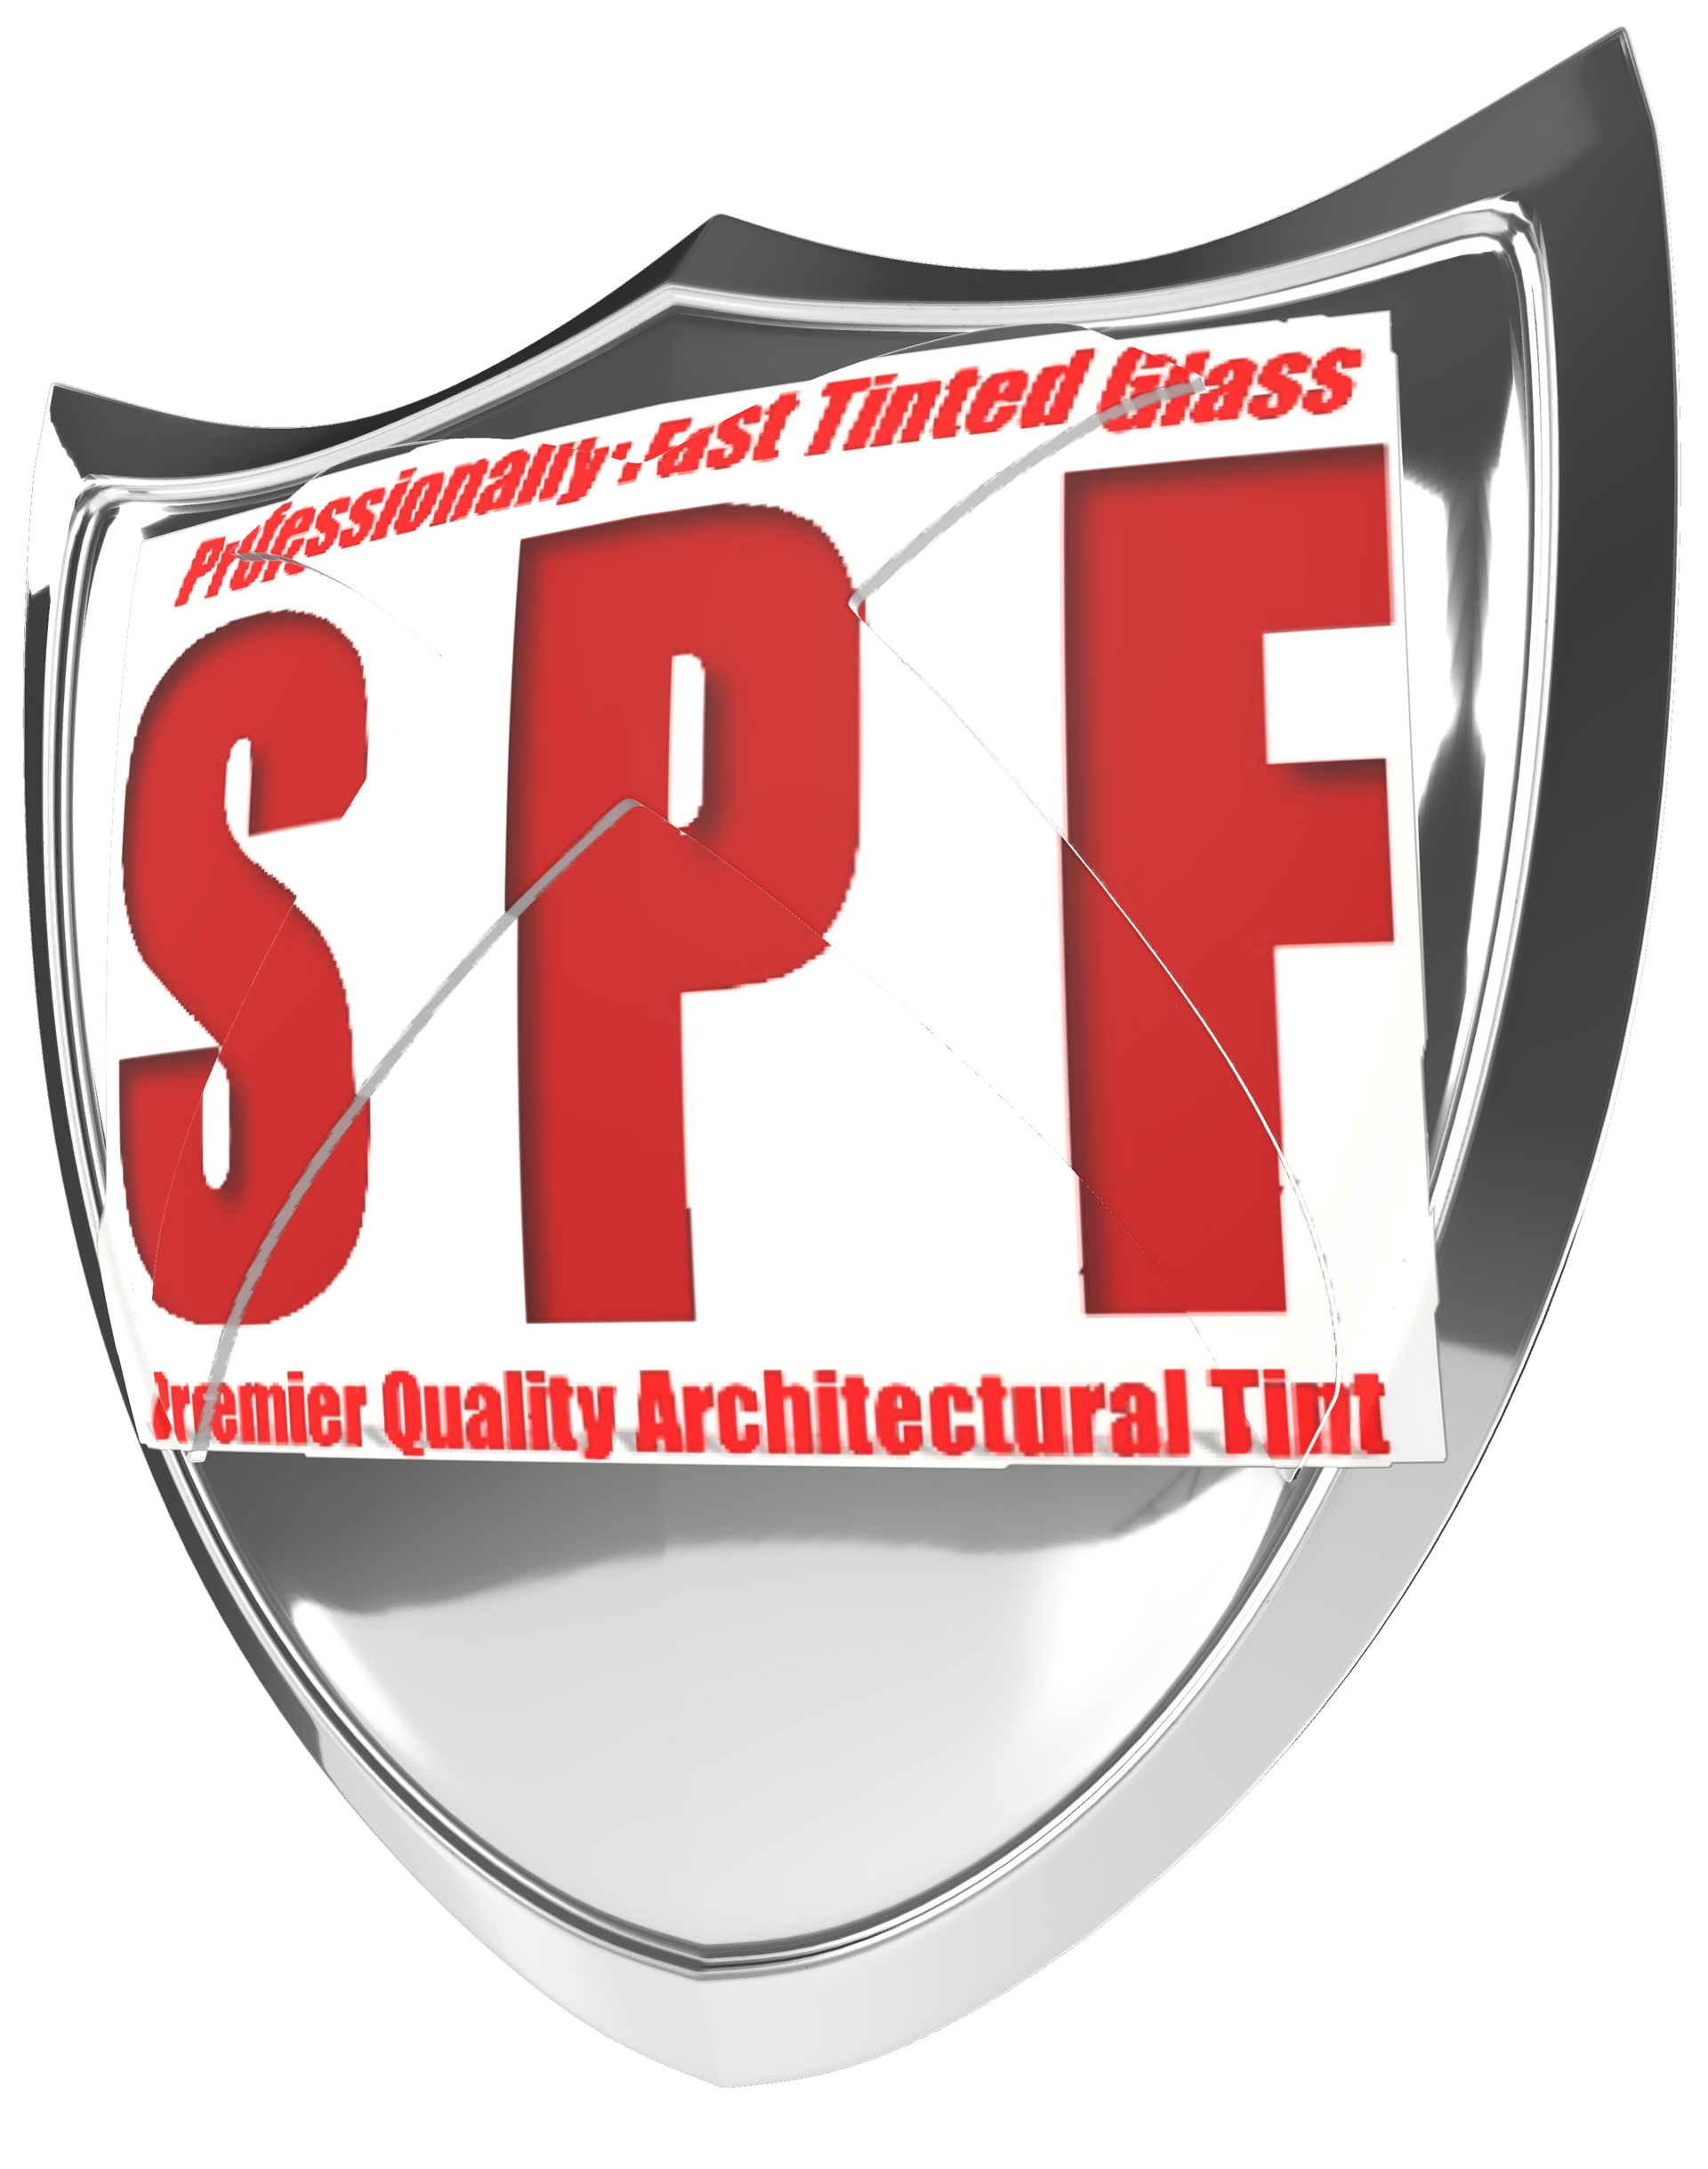 Authentic SPF Performance Tint for home or business windows in Alabama (Logo)